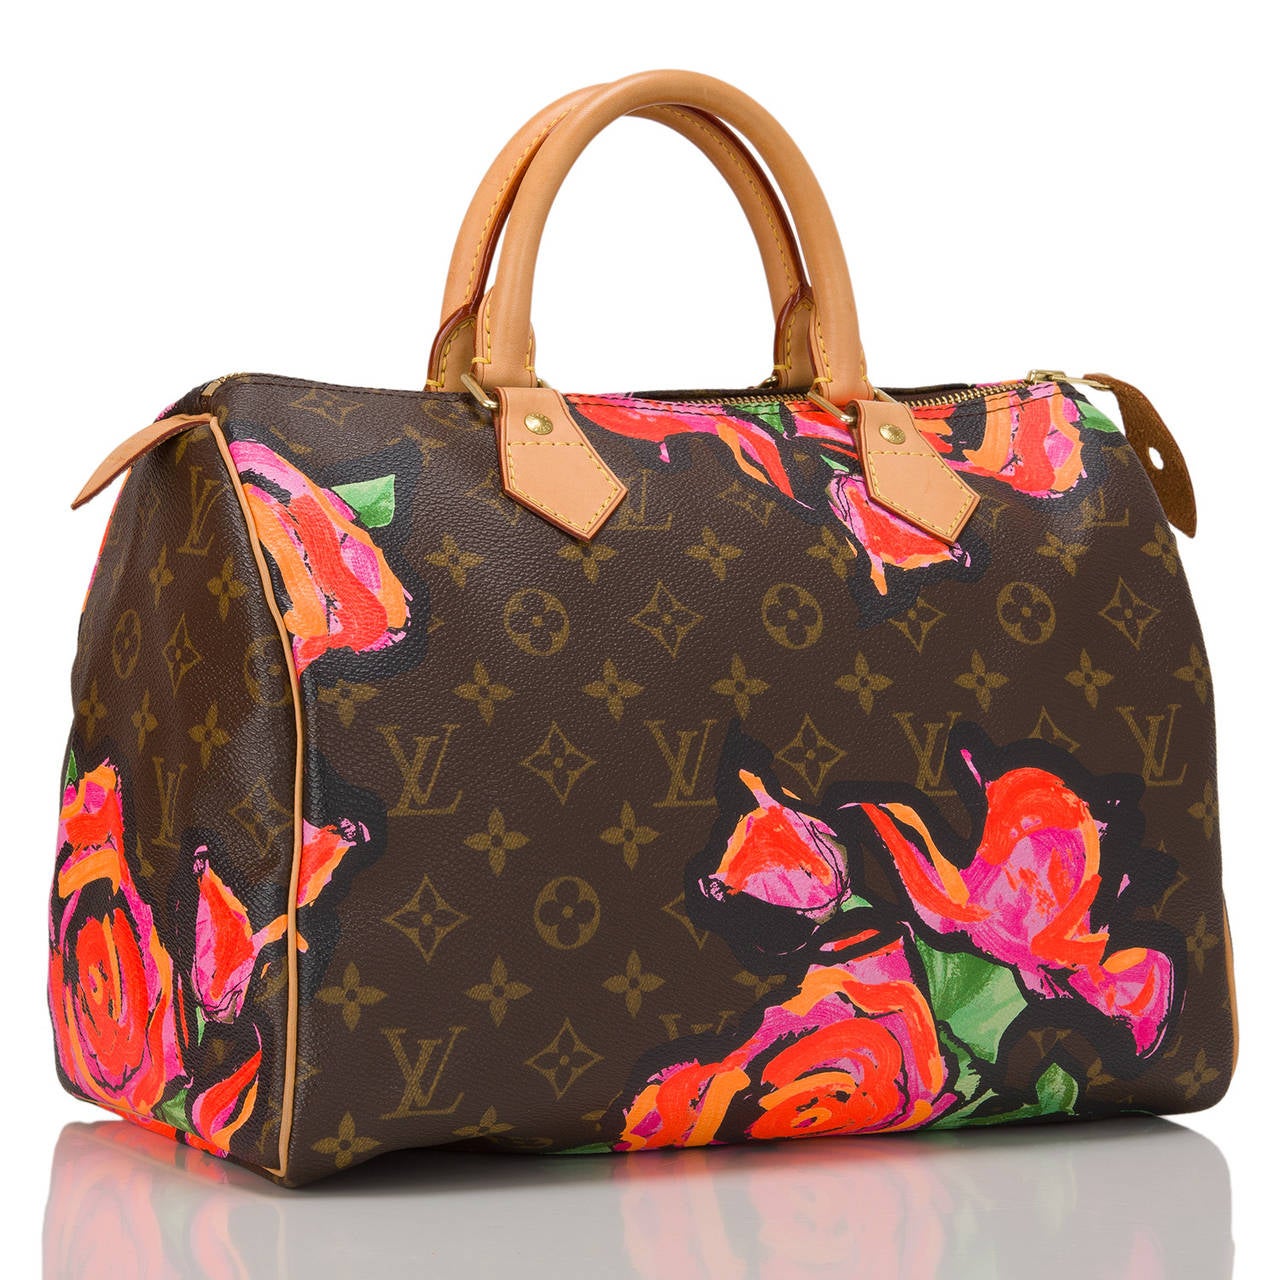 Louis Vuitton Monogram Roses Speedy 30 of coated canvas inspired by Stephen Sprouse.

This limited edition bag features a bright rose design, polished brass hardware, yellow contrast stitching, top zipper closure and double rolled handles.

The